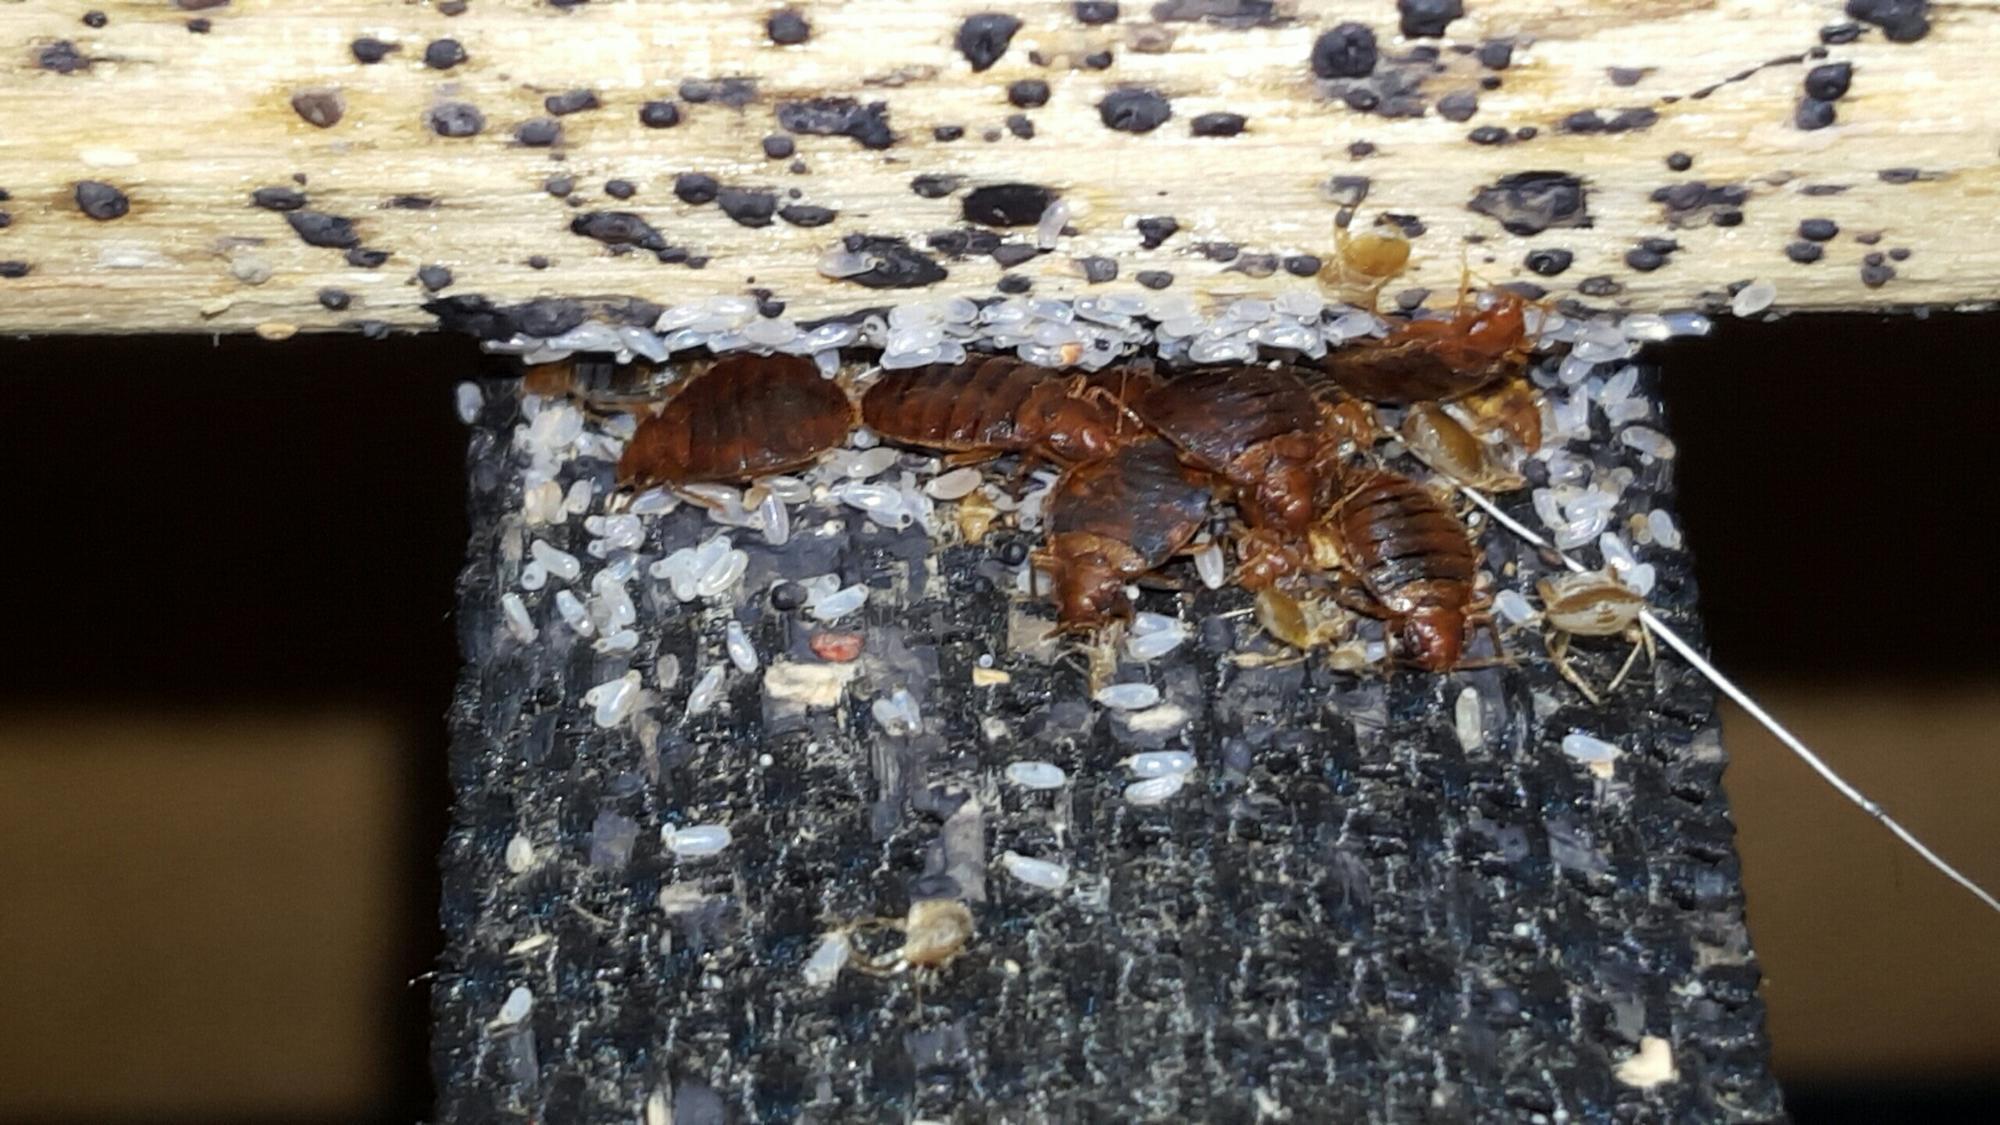 adult bed bugs and lighter colored immature stages crowd under a box spring